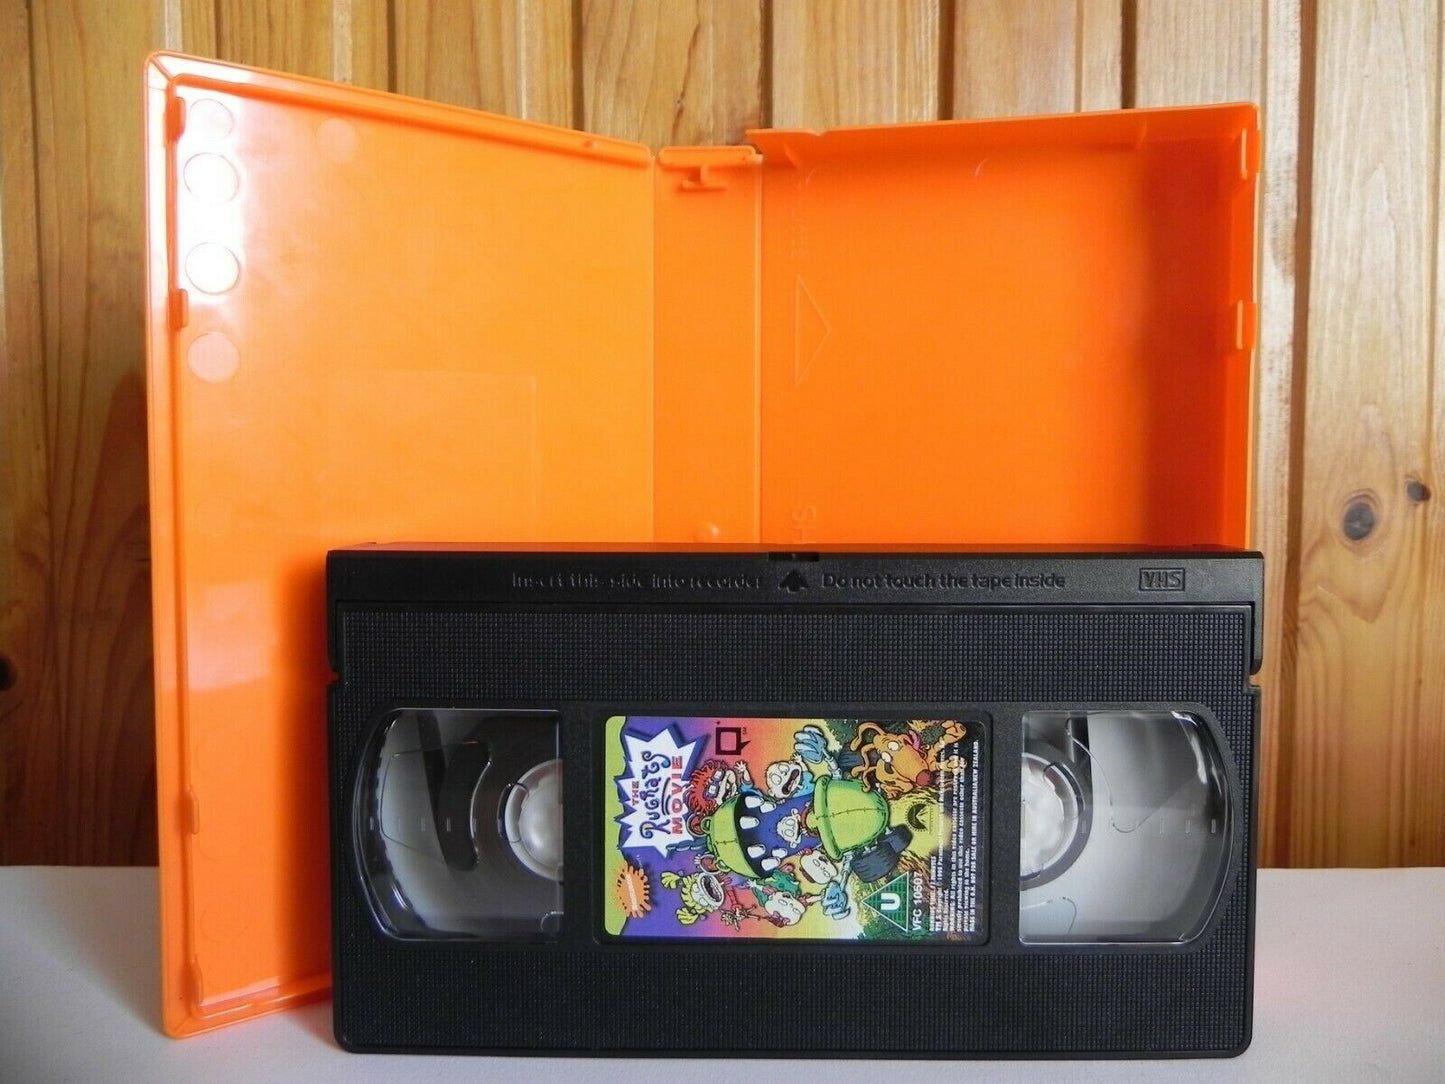 The Rugrats Movie - Nickelodeon - Animated - Adventure - Children's - Pal VHS-